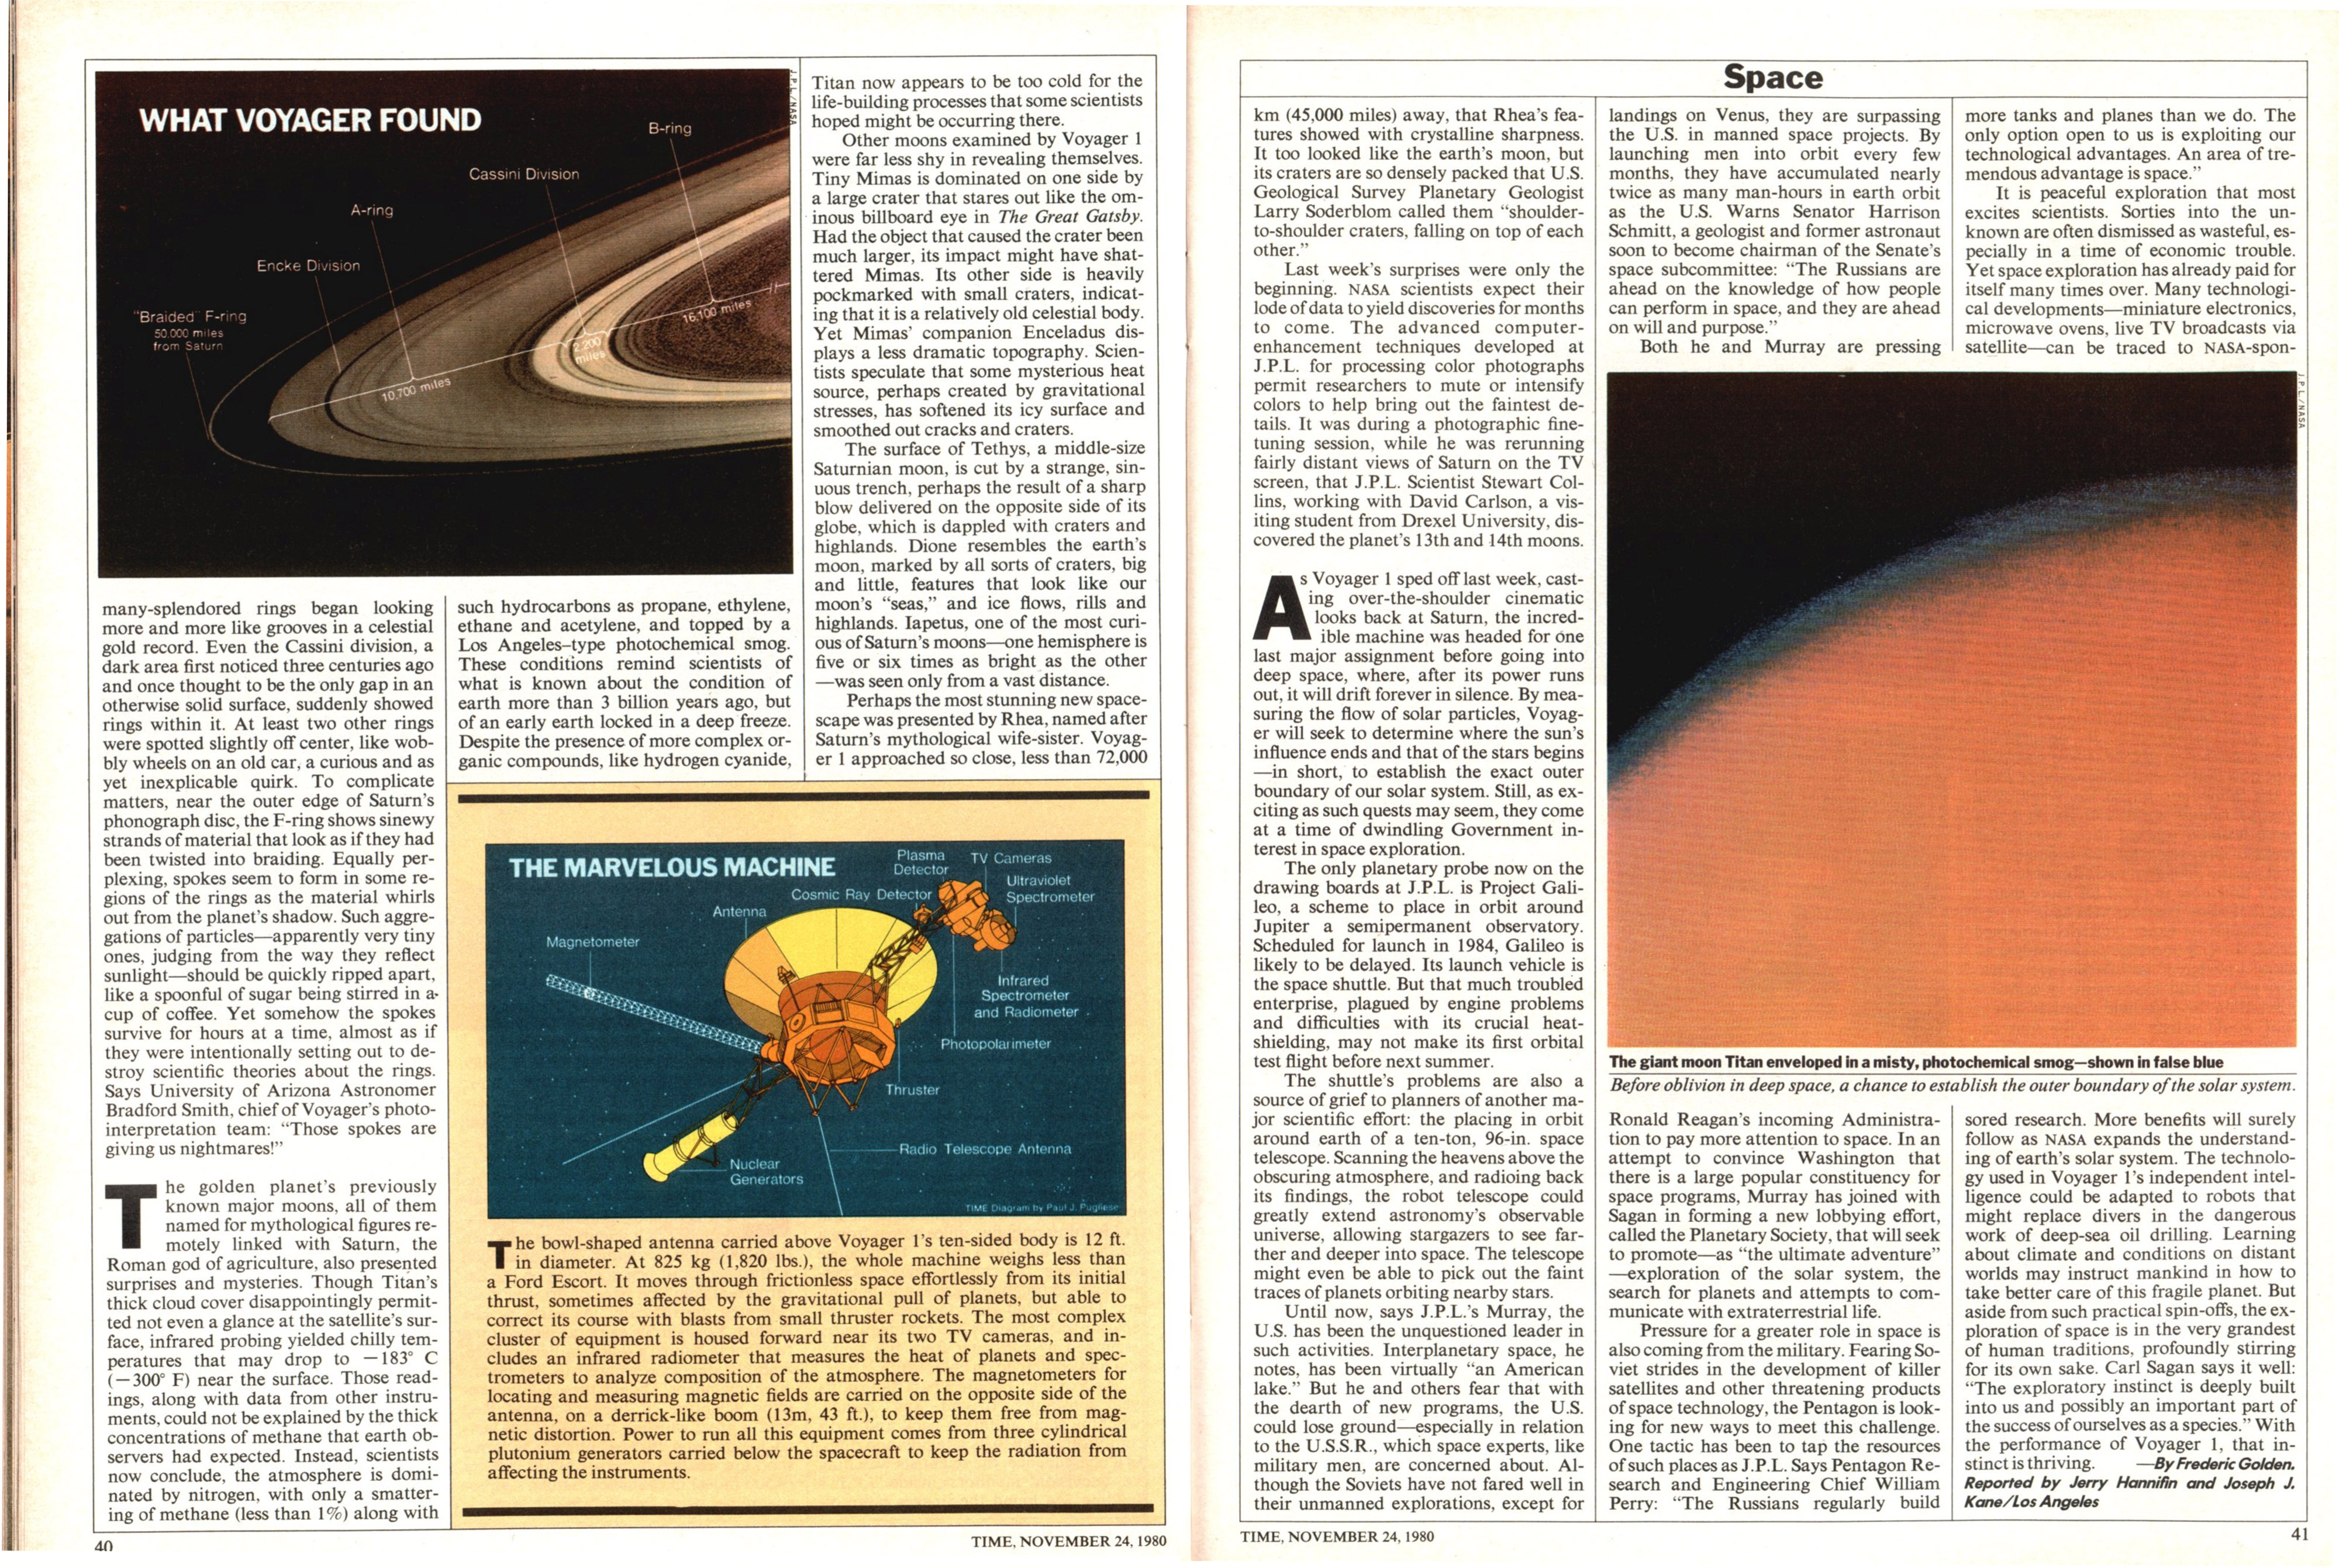 A spread from the Nov. 24, 1980, issue of TIME